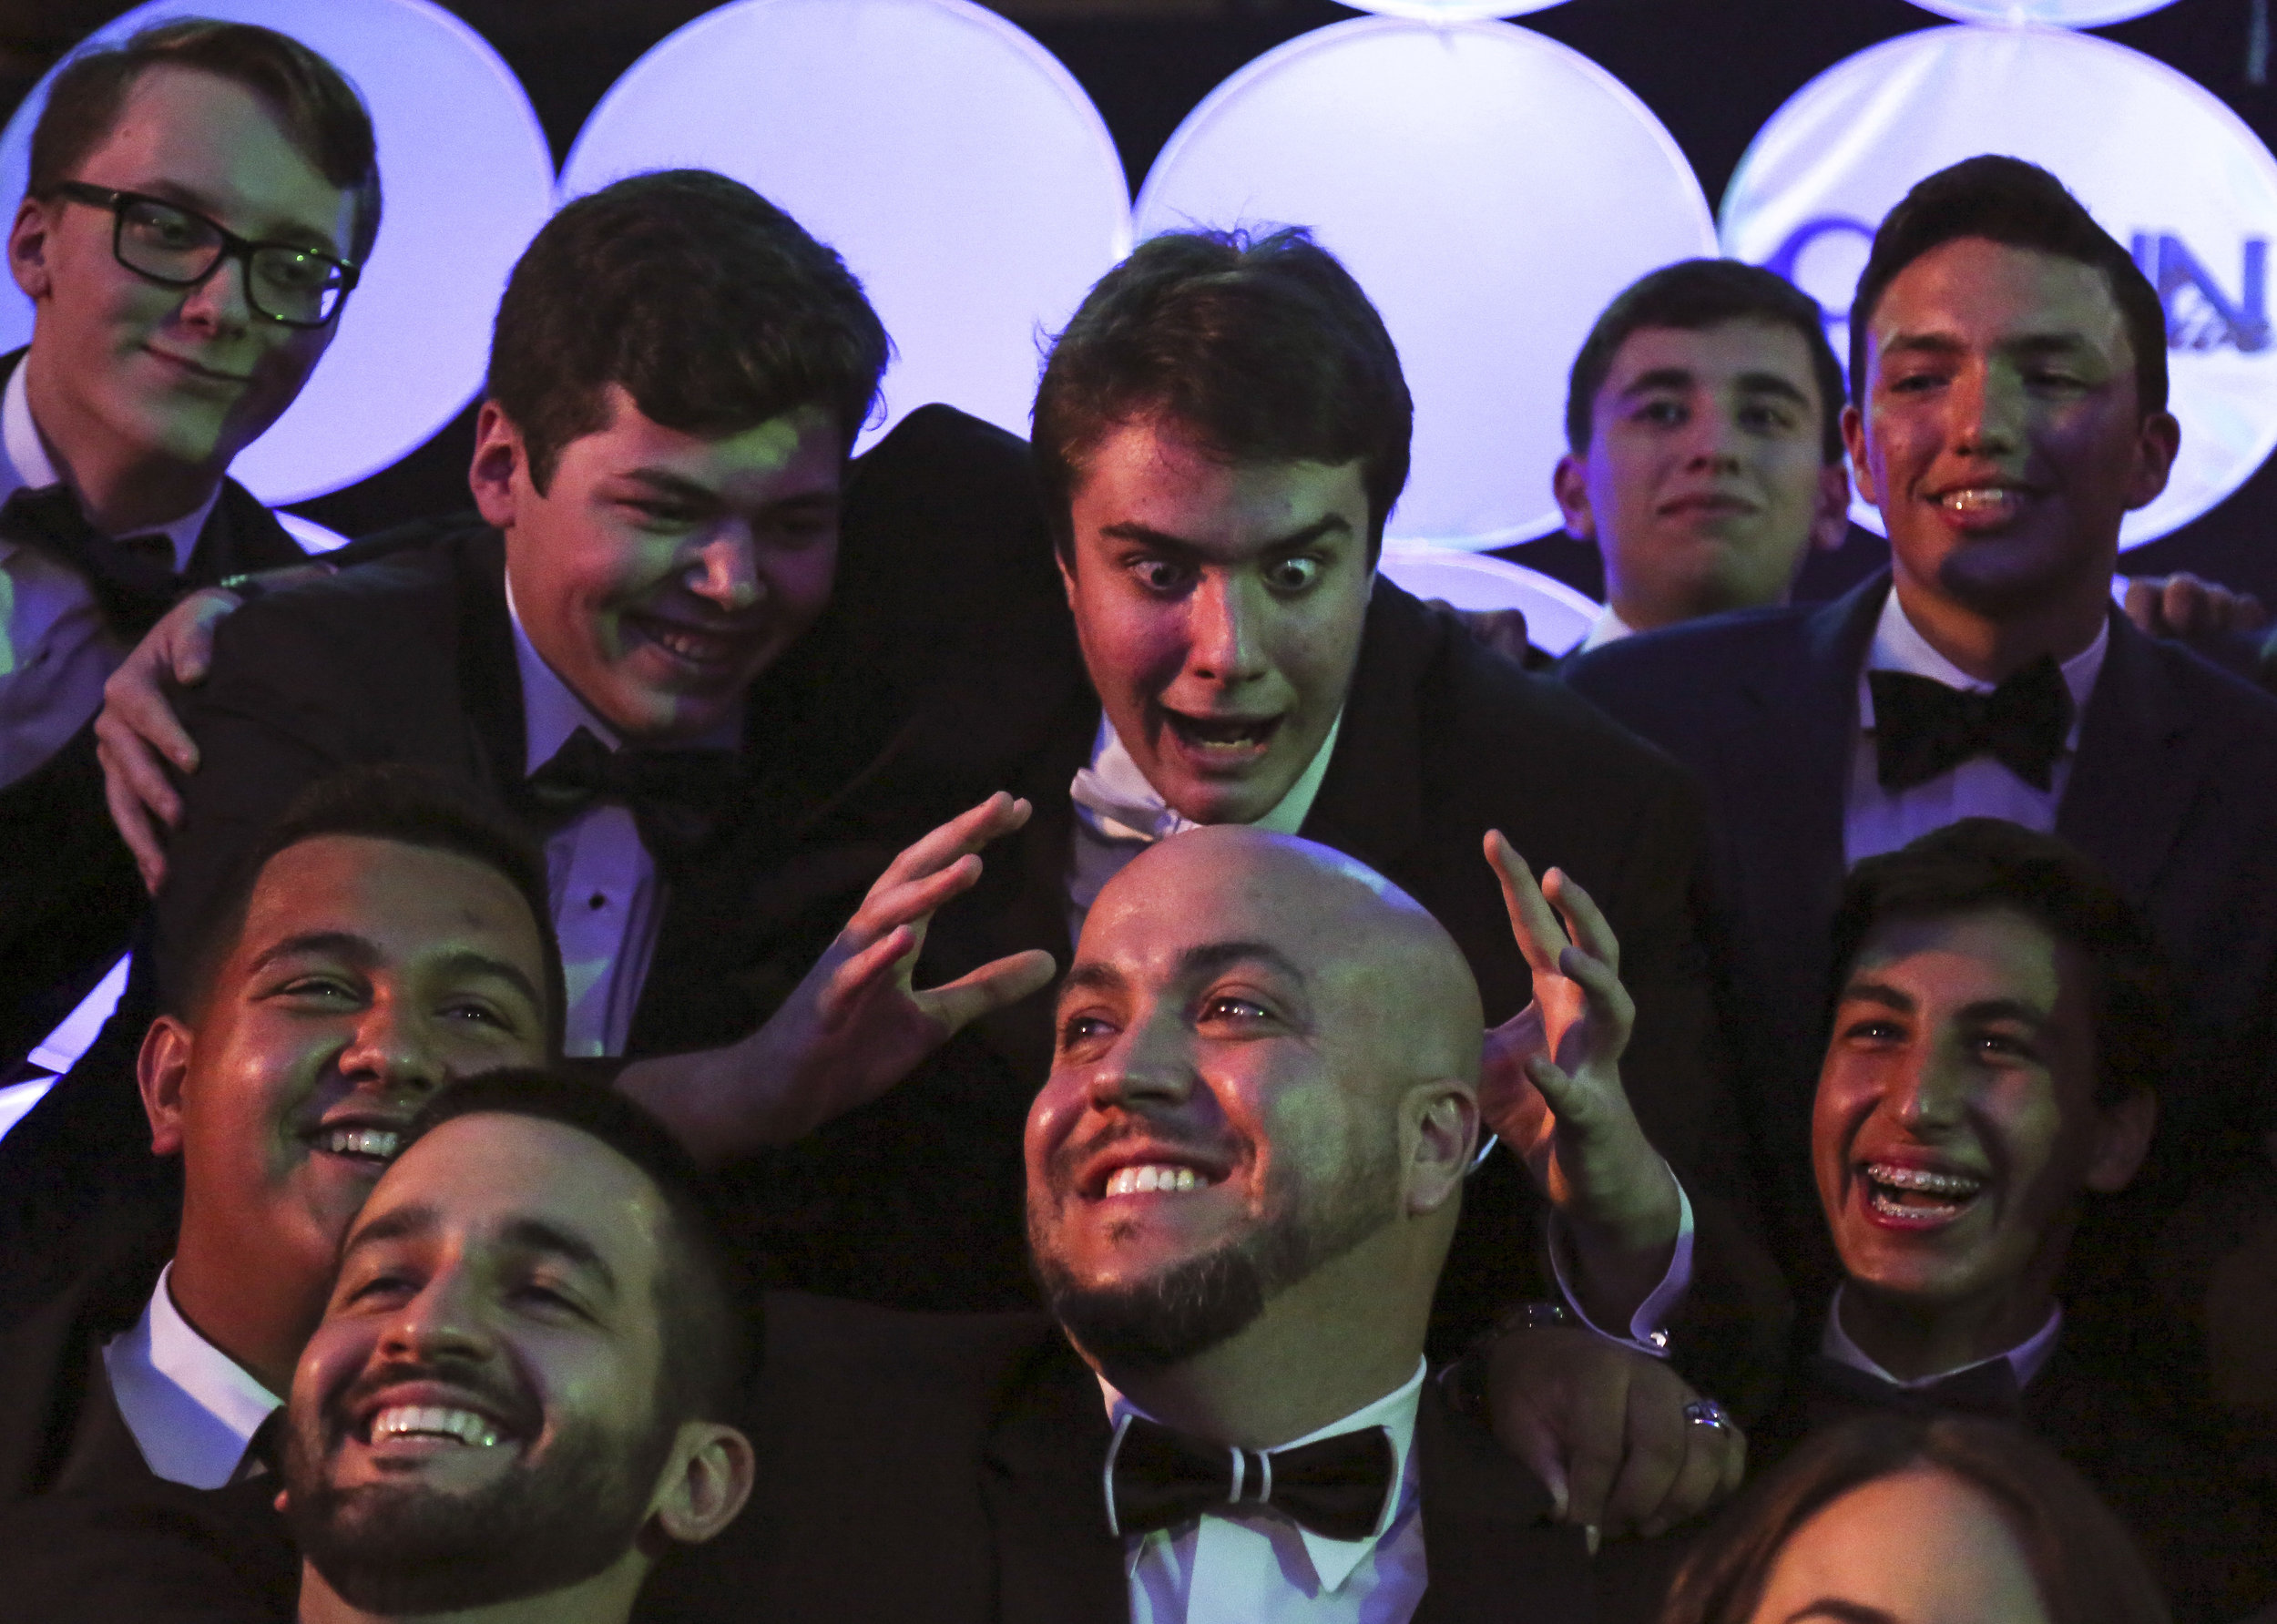  Phillip Bootsma, center top, makes a funny face while taking a group picture with CCNN live moderator Omar Delgado, center bottom, during the 3rd Annual Media Excellence Awards at Christopher Columbus High School on Saturday, April 16, 2016. The cer